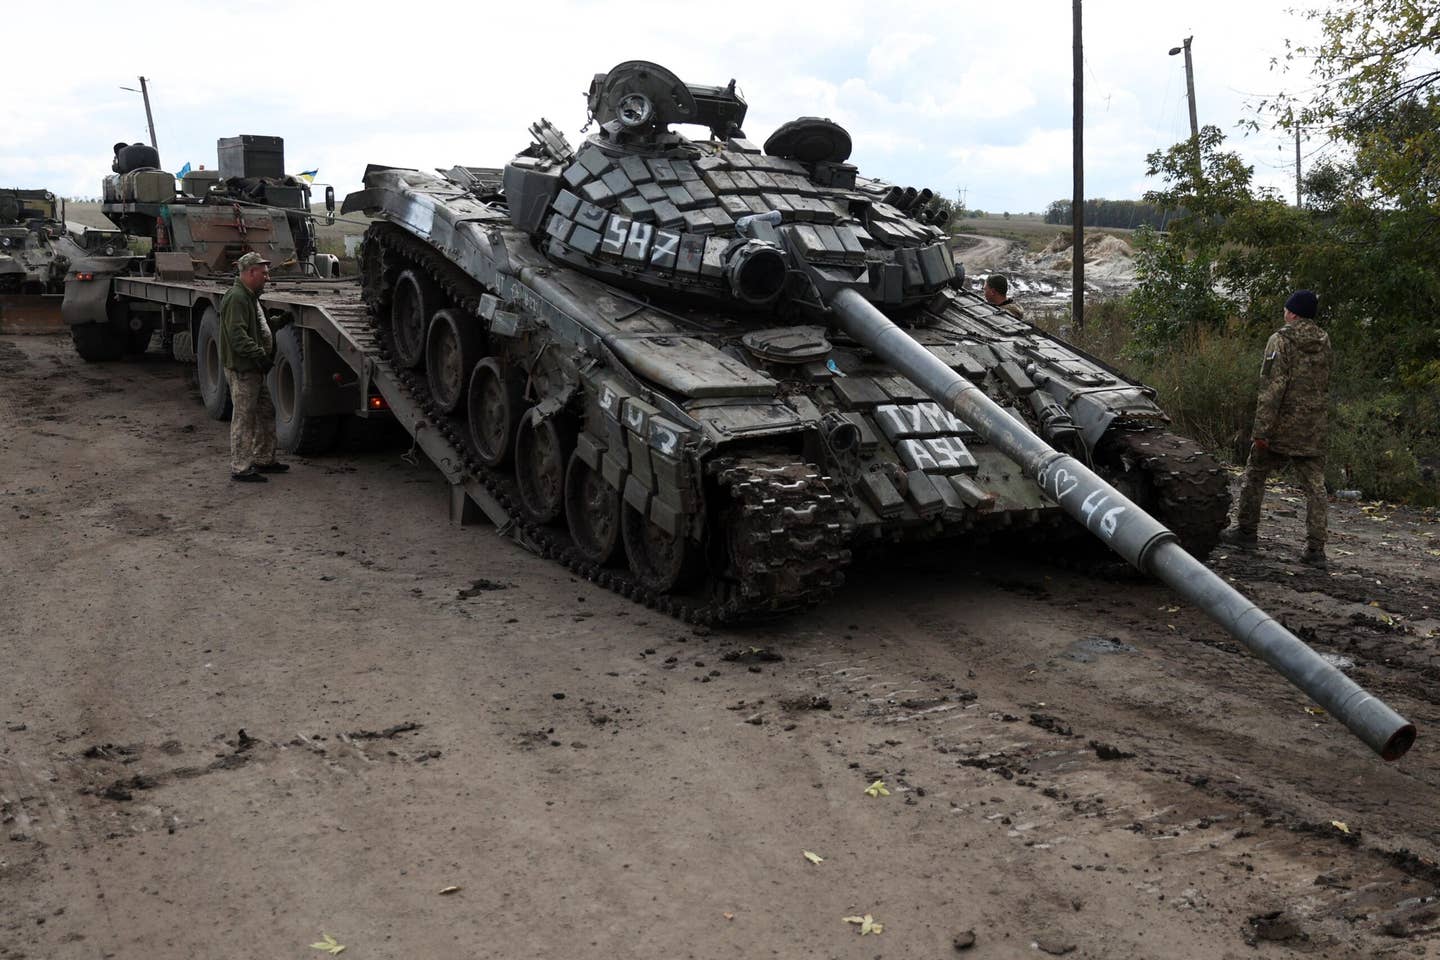 A captured Russian T-72 tank is loaded on a truck by Ukrainian soldiers outside the town of Izyum on Sept. 24. (Photo by ANATOLII STEPANOV/AFP via Getty Images)